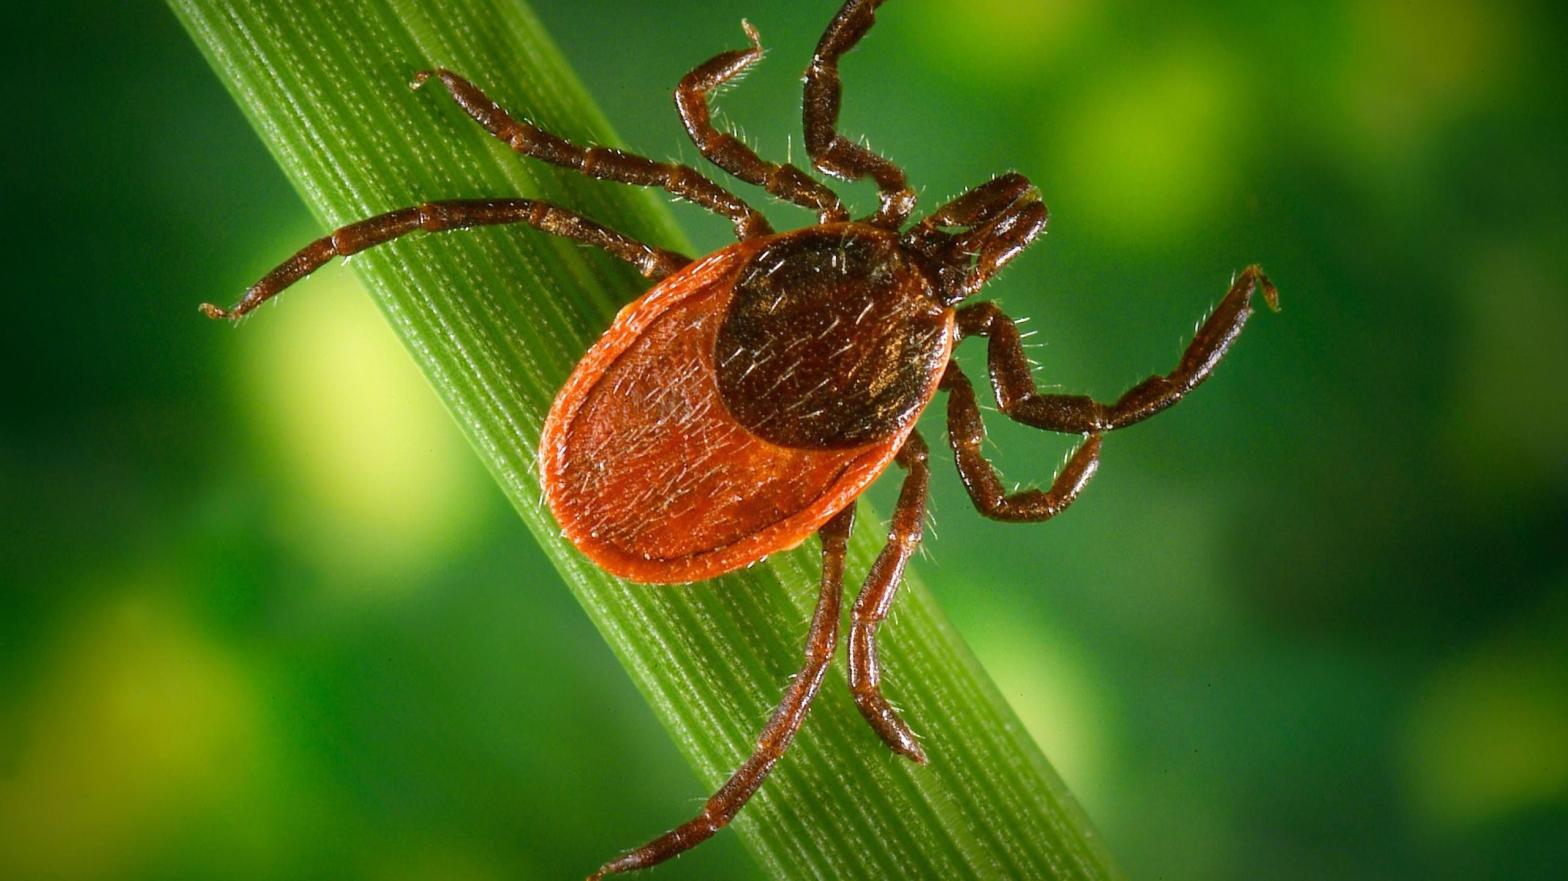 A female Ixodes pacificus tick, one of the two primary species that spread Lyme disease in the United States. Lyme is caused by the bacteria Borrelia burgdorferi. (Photo: James Gathany; William L. Nicholson/CDC)